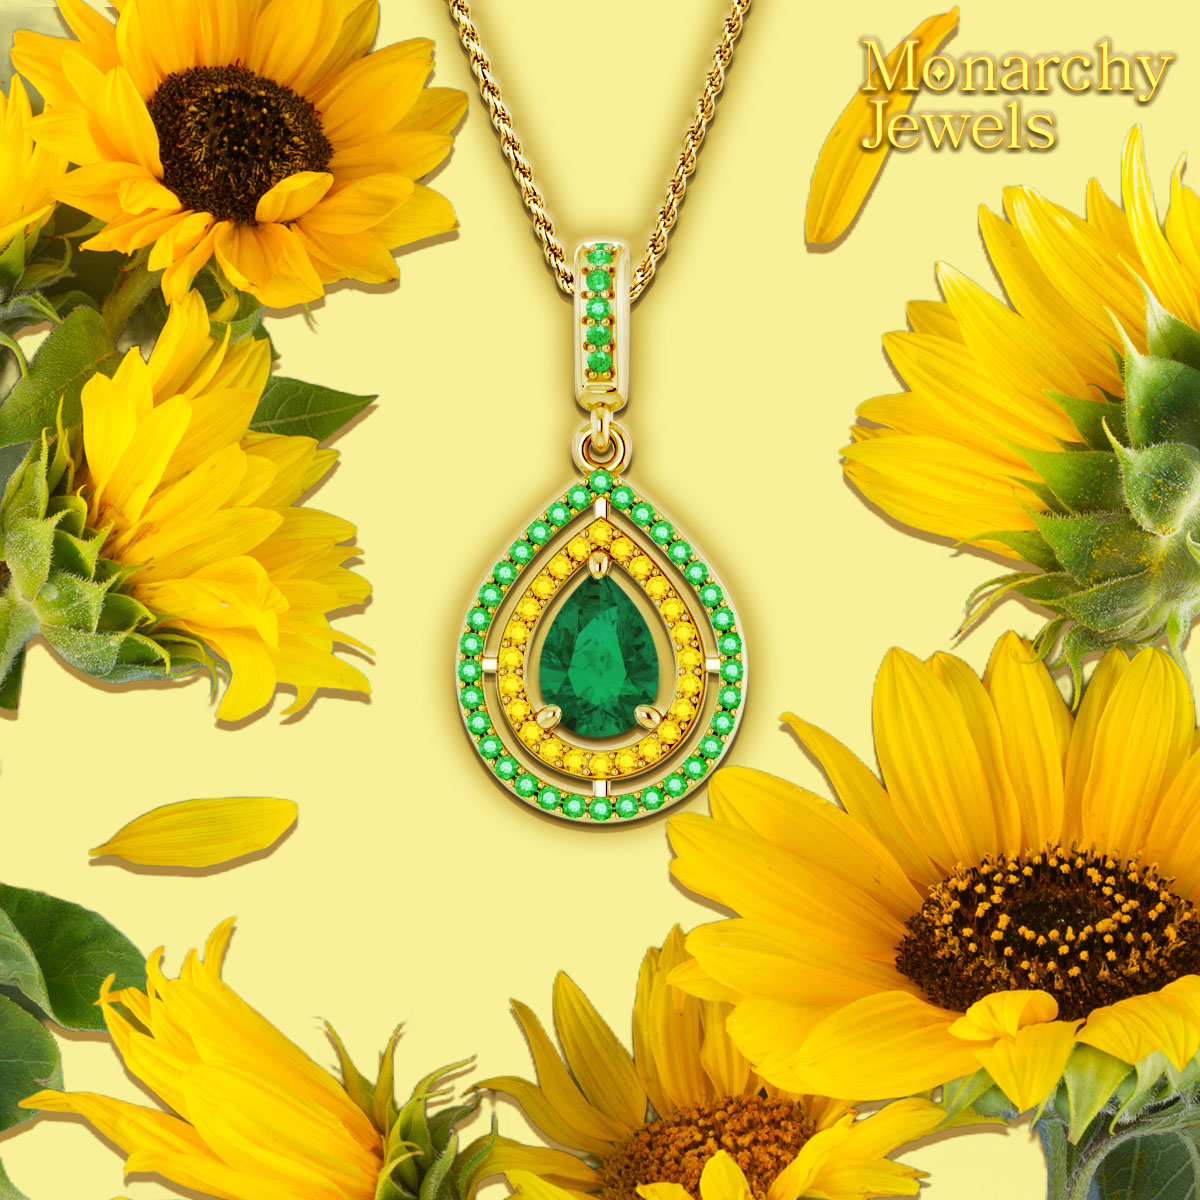 Sunflower Yellow Sapphire and Natural Green Emerald are blooming in the Monarchy.
#MonarchyJewels #Emeralds #EmeraldJewelry #YellowSapphire #Sunflower